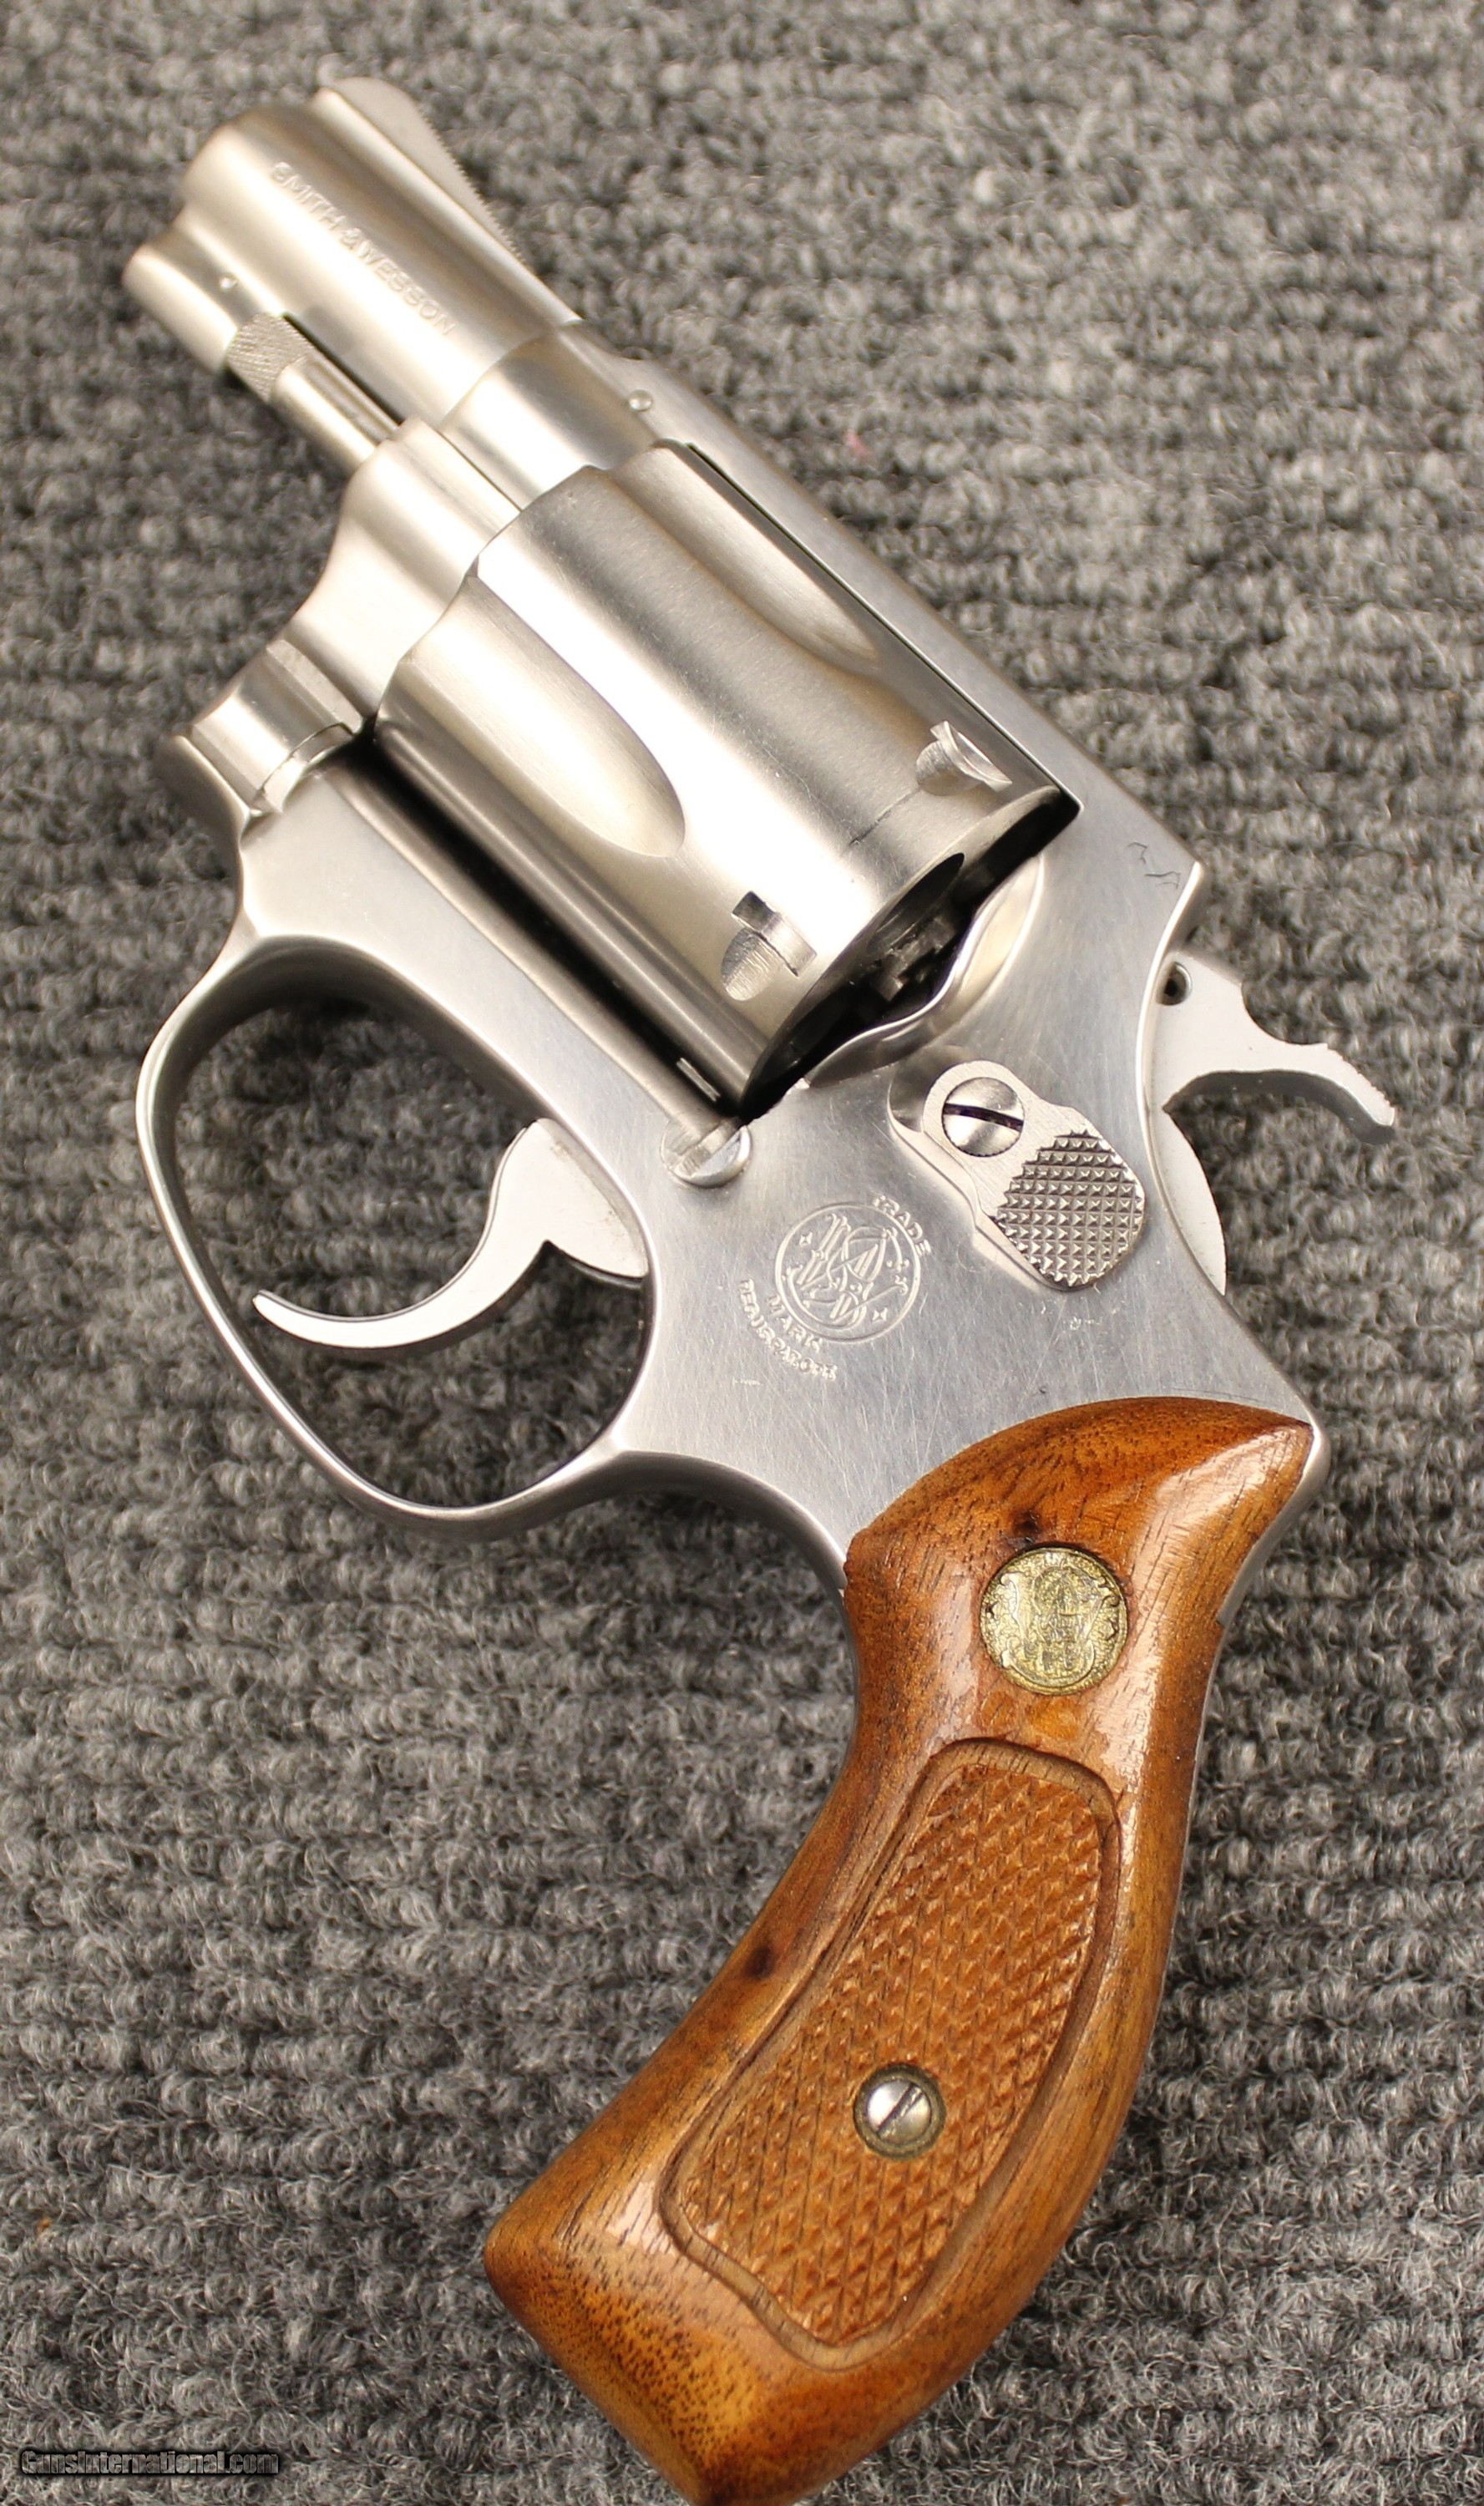 Smith & Wesson Model 60 (No Dash) Stainless Steel Revolver 38 S&W Spl